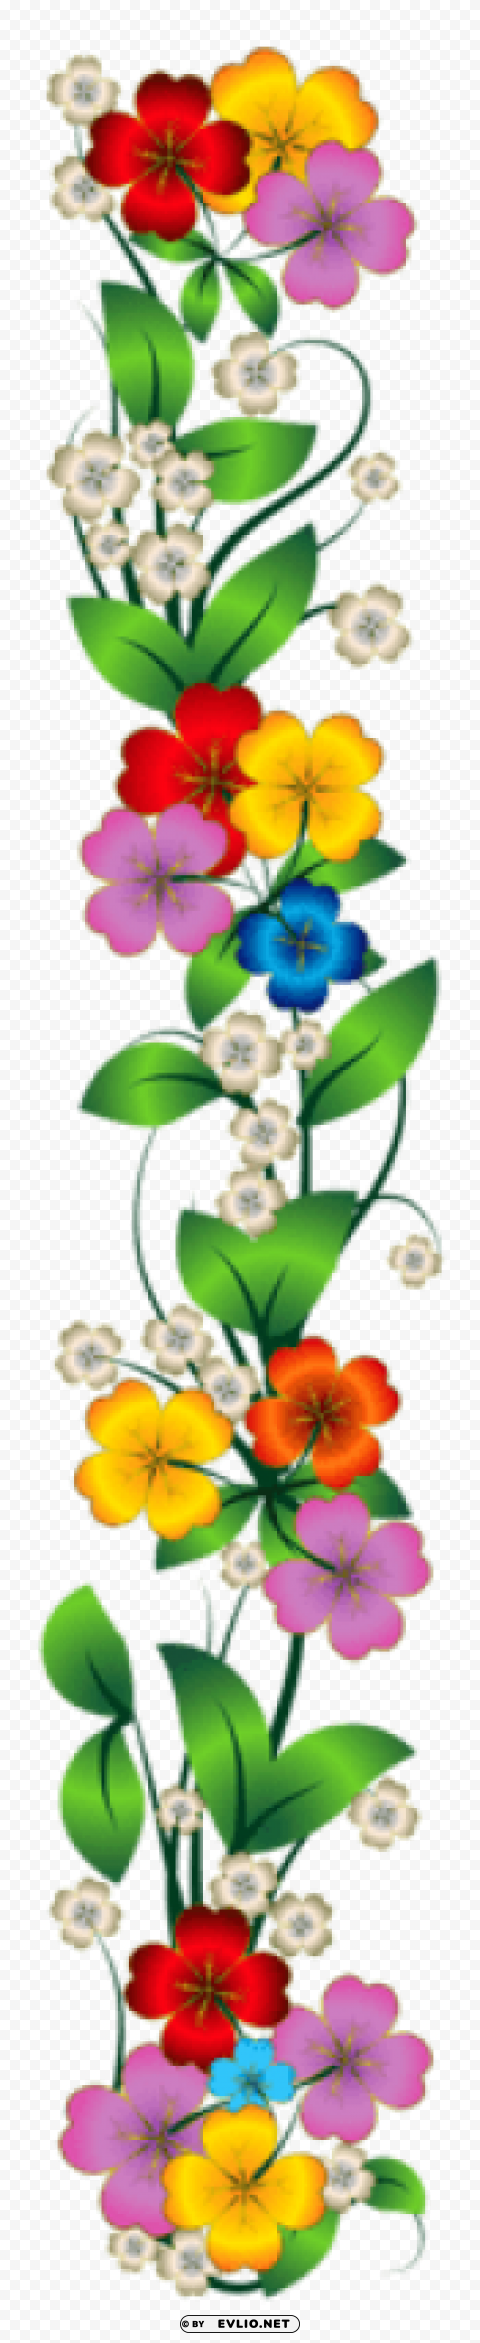 flowers decor Transparent PNG Isolated Illustrative Element clipart png photo - 25b53655